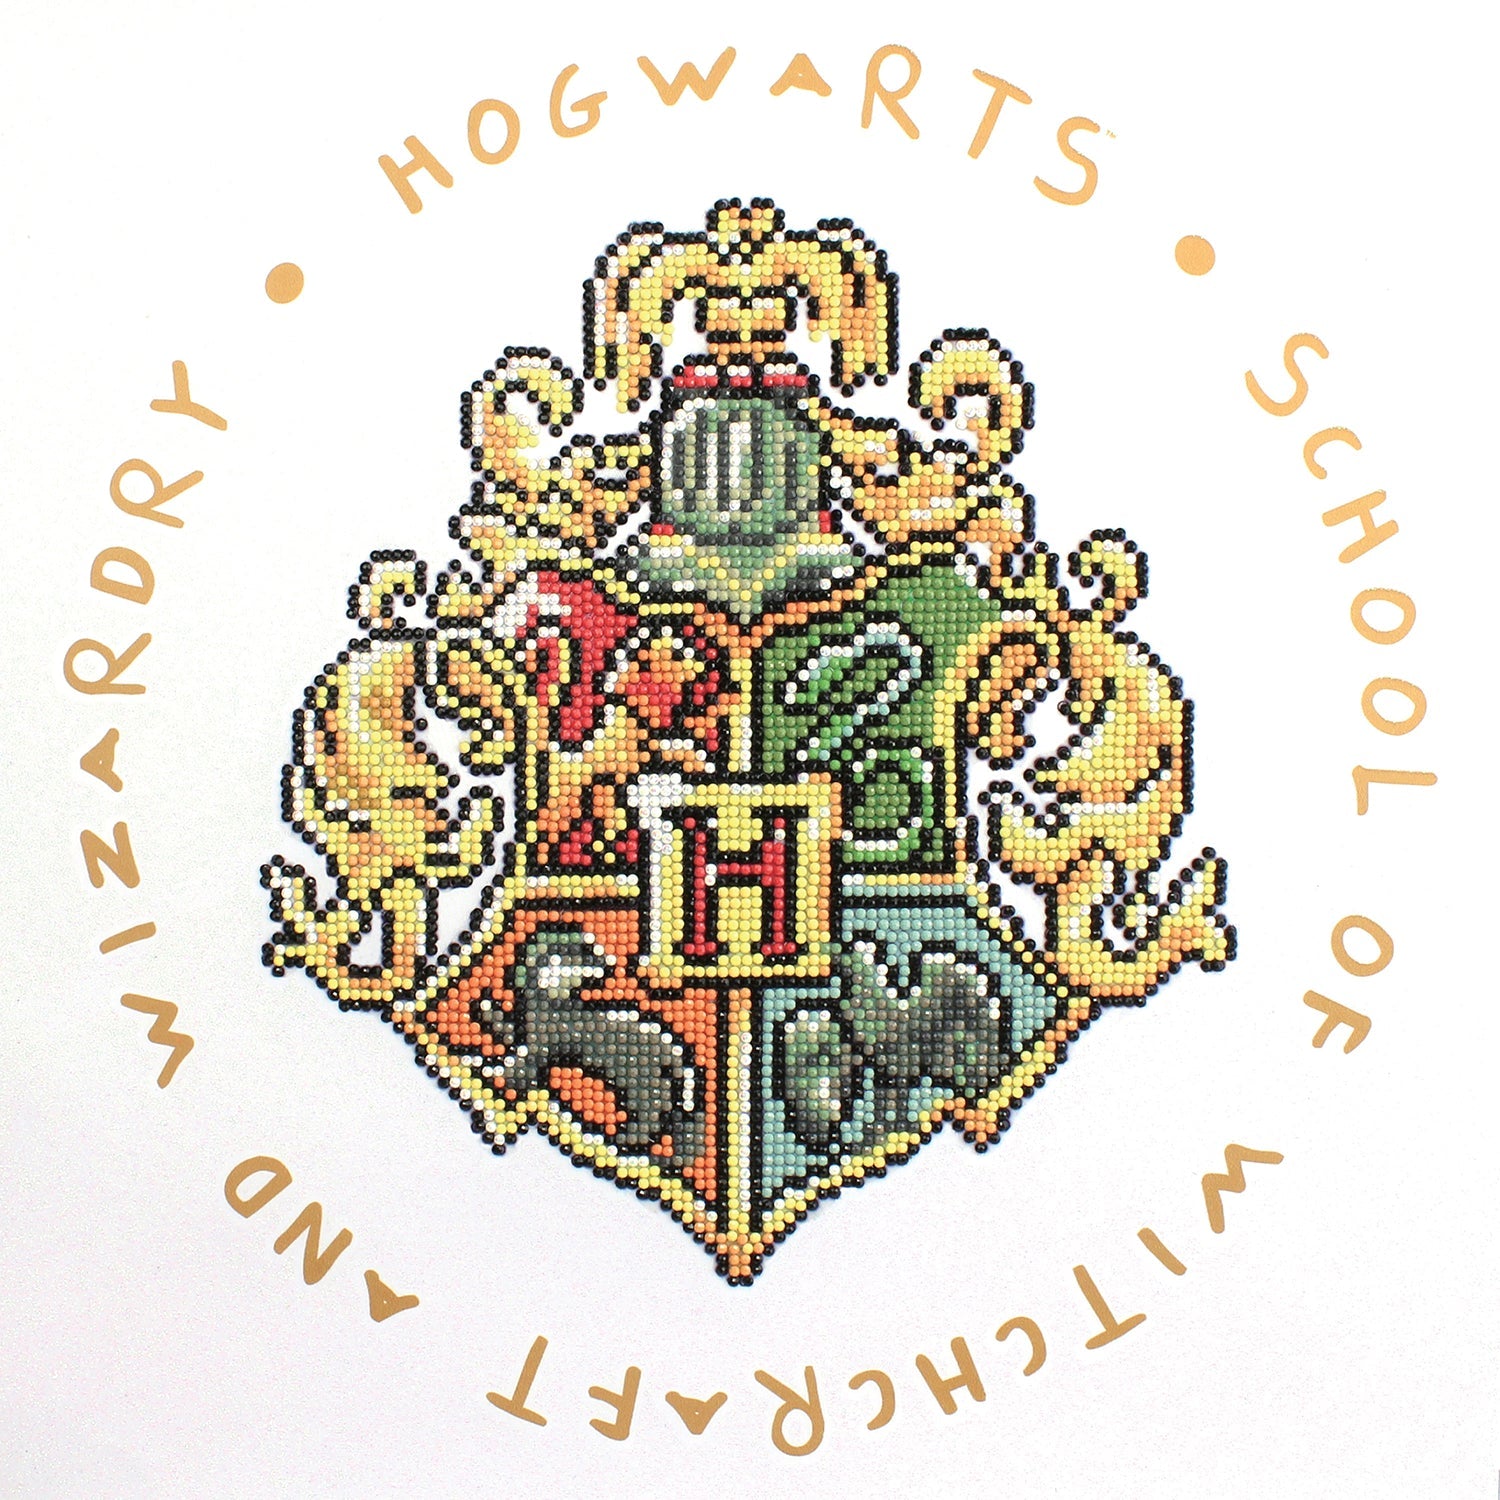 Camelot Dots - Hogwarts School of Witch and Wiz Diamond Painting Kit